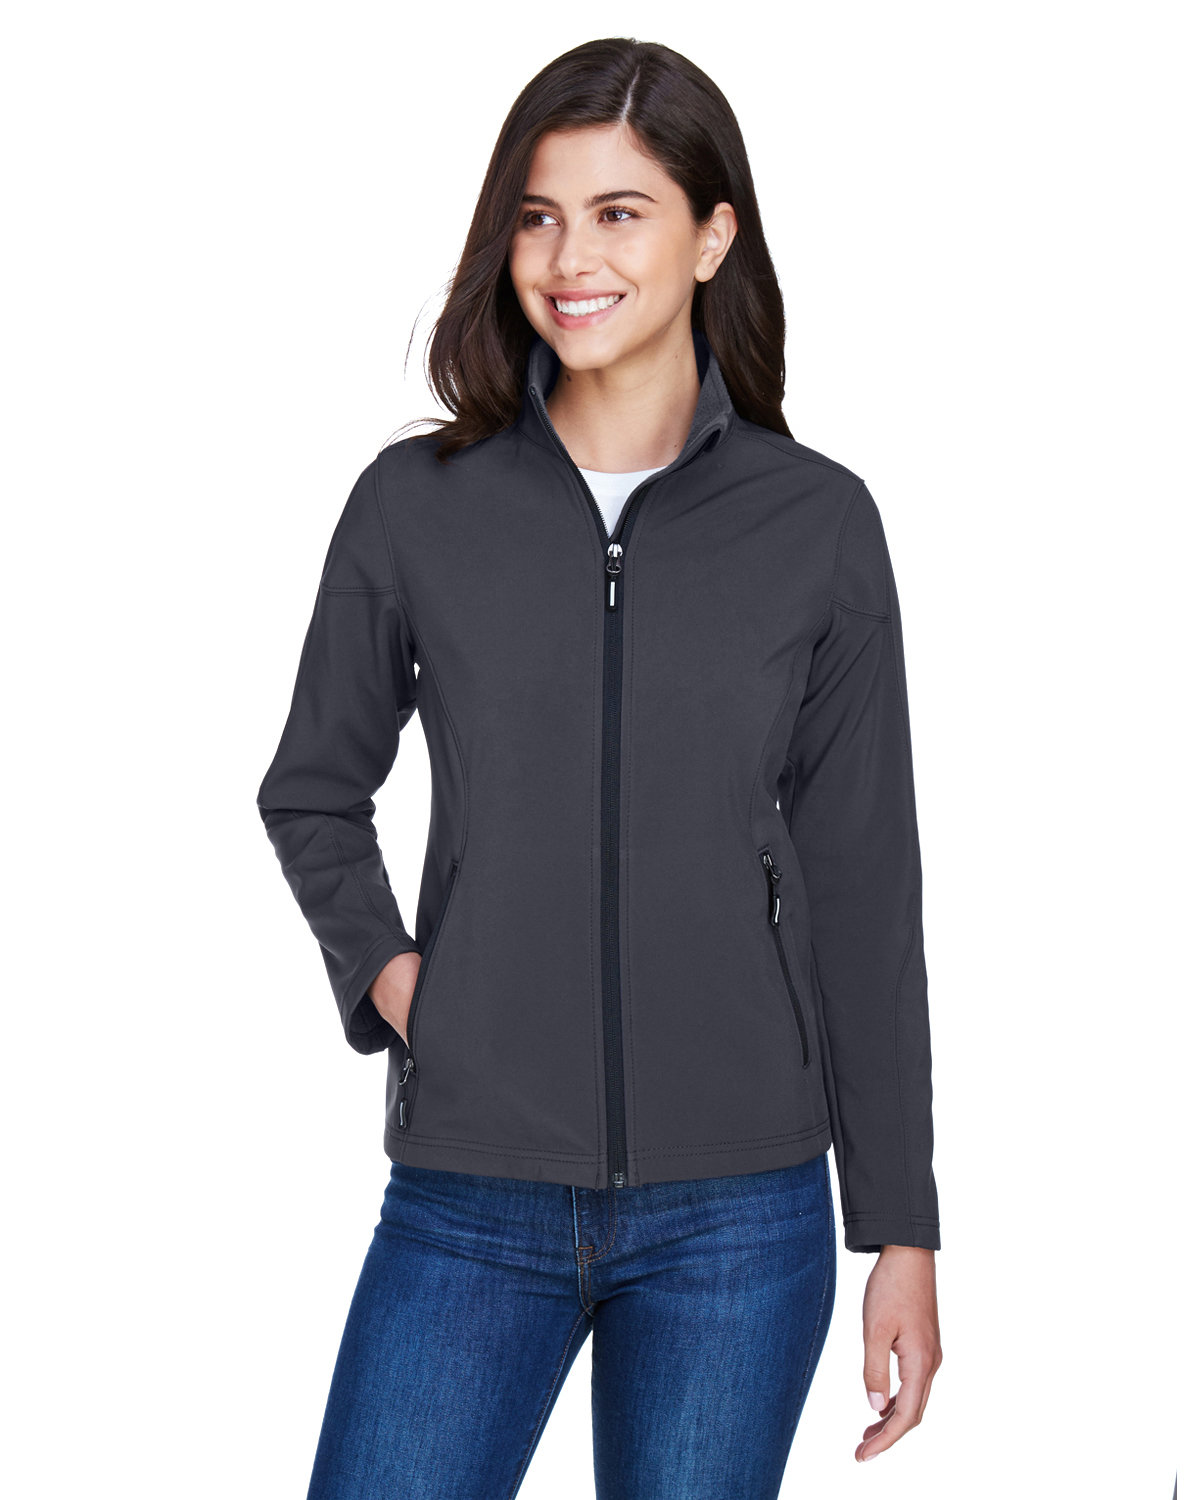 Ladies Cruise Two-Layer Fleece Bonded Soft shell Jacket-CORE365